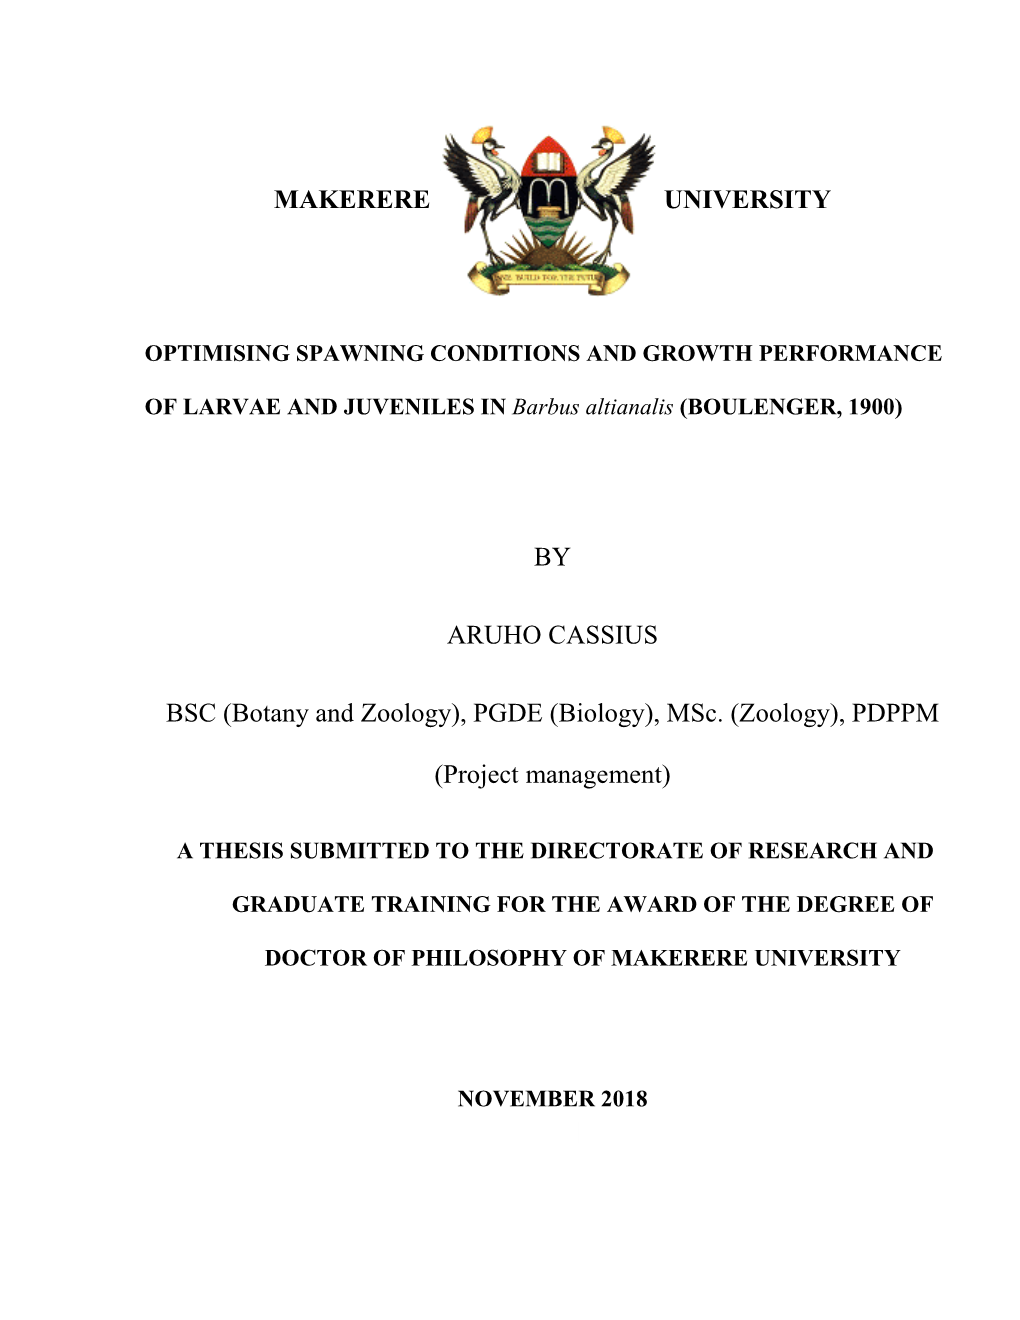 Final Thesis-Aruho Cassisus